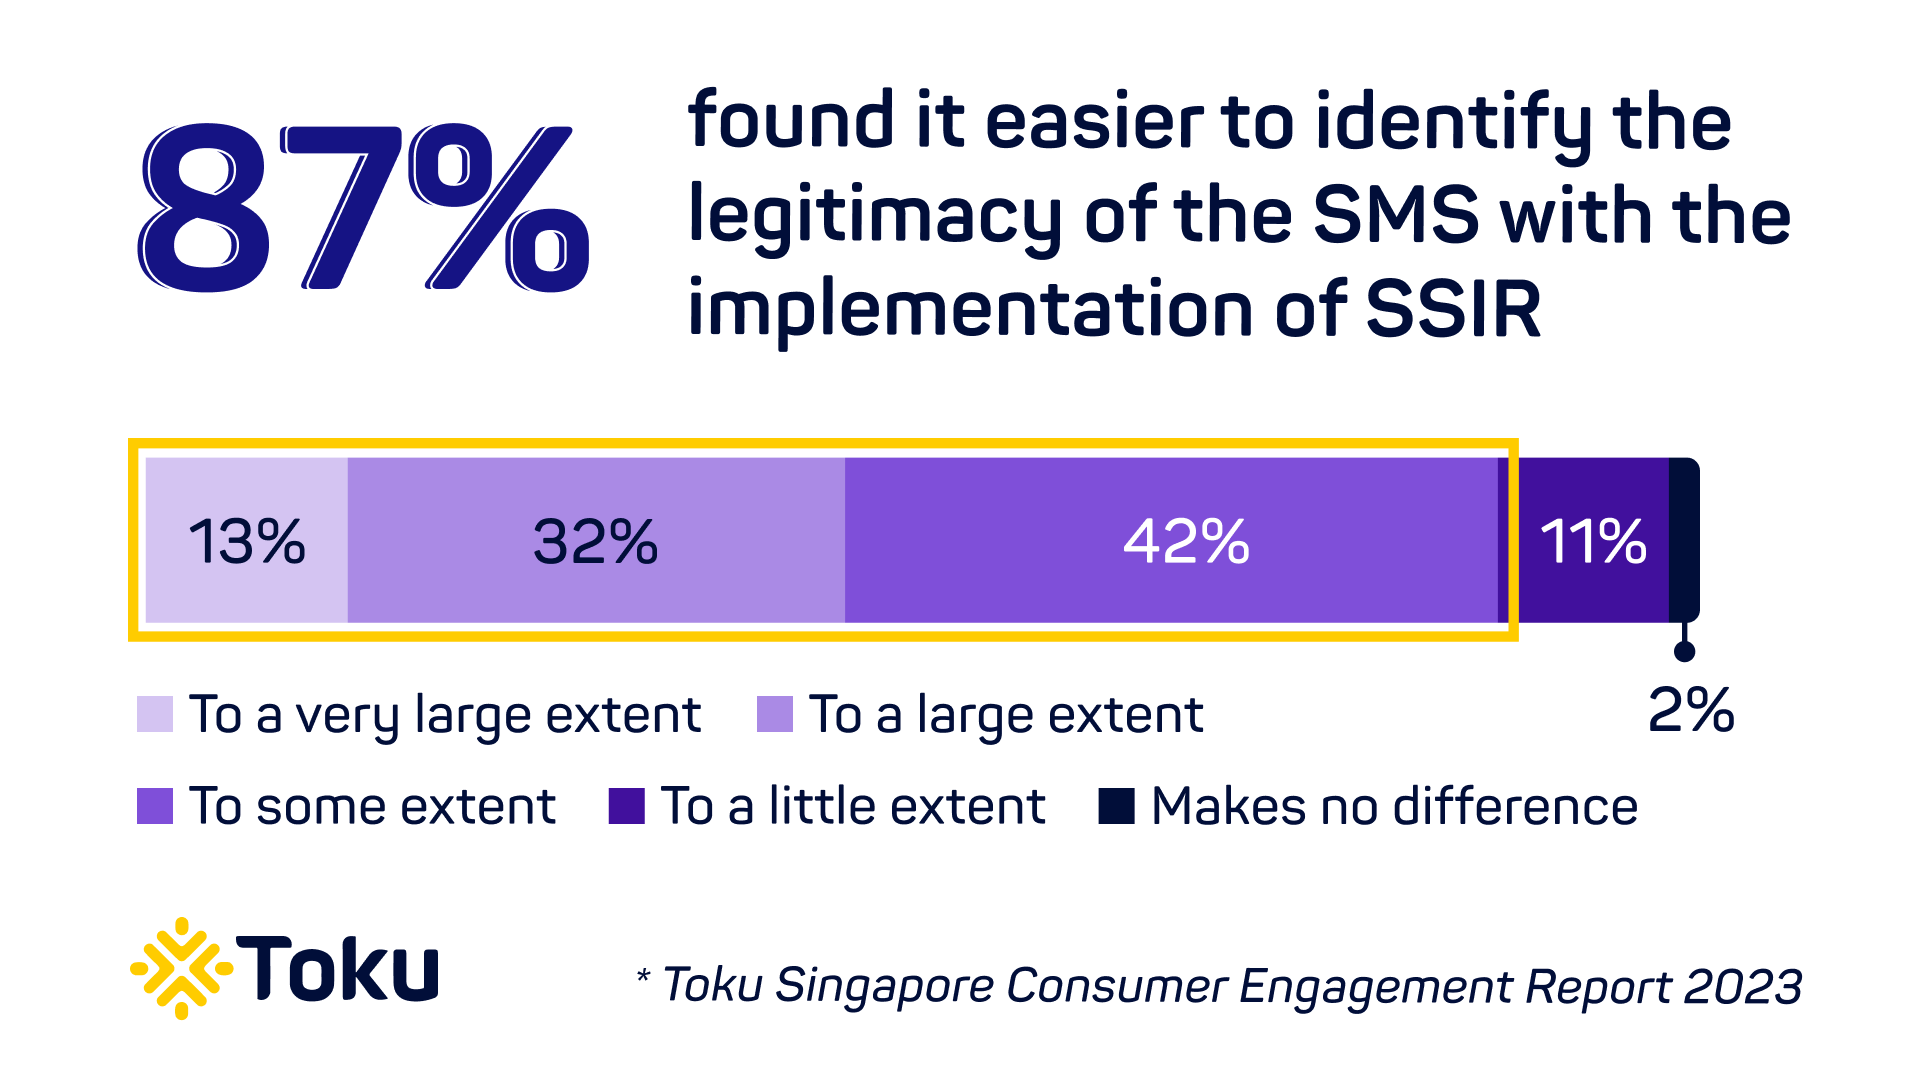 87% find it easier to identify legitimacy of SMS with SSIR